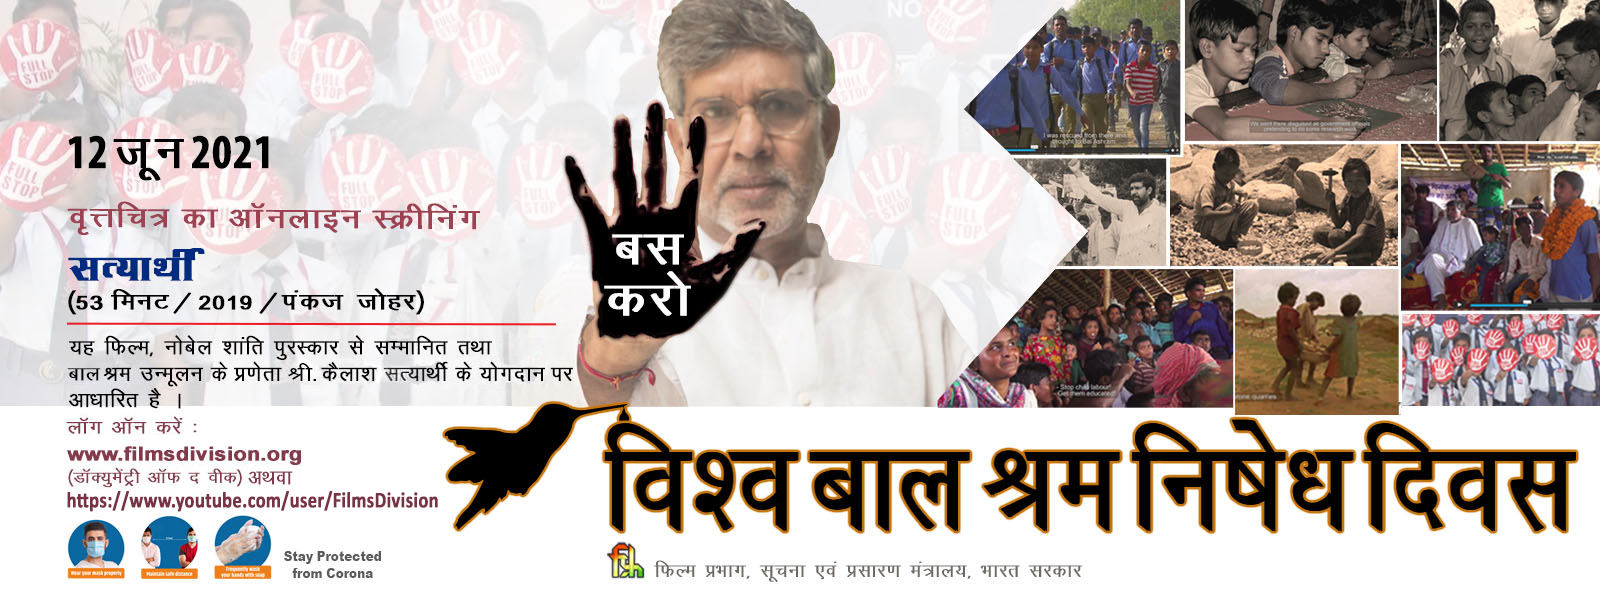 Film On Nobel Peace Laureate Kailash Satyarthi To Mark World Day Against Child Labour By Films Division On 12th June 21 India Education Latest Education News Global Educational News Recent Educational News